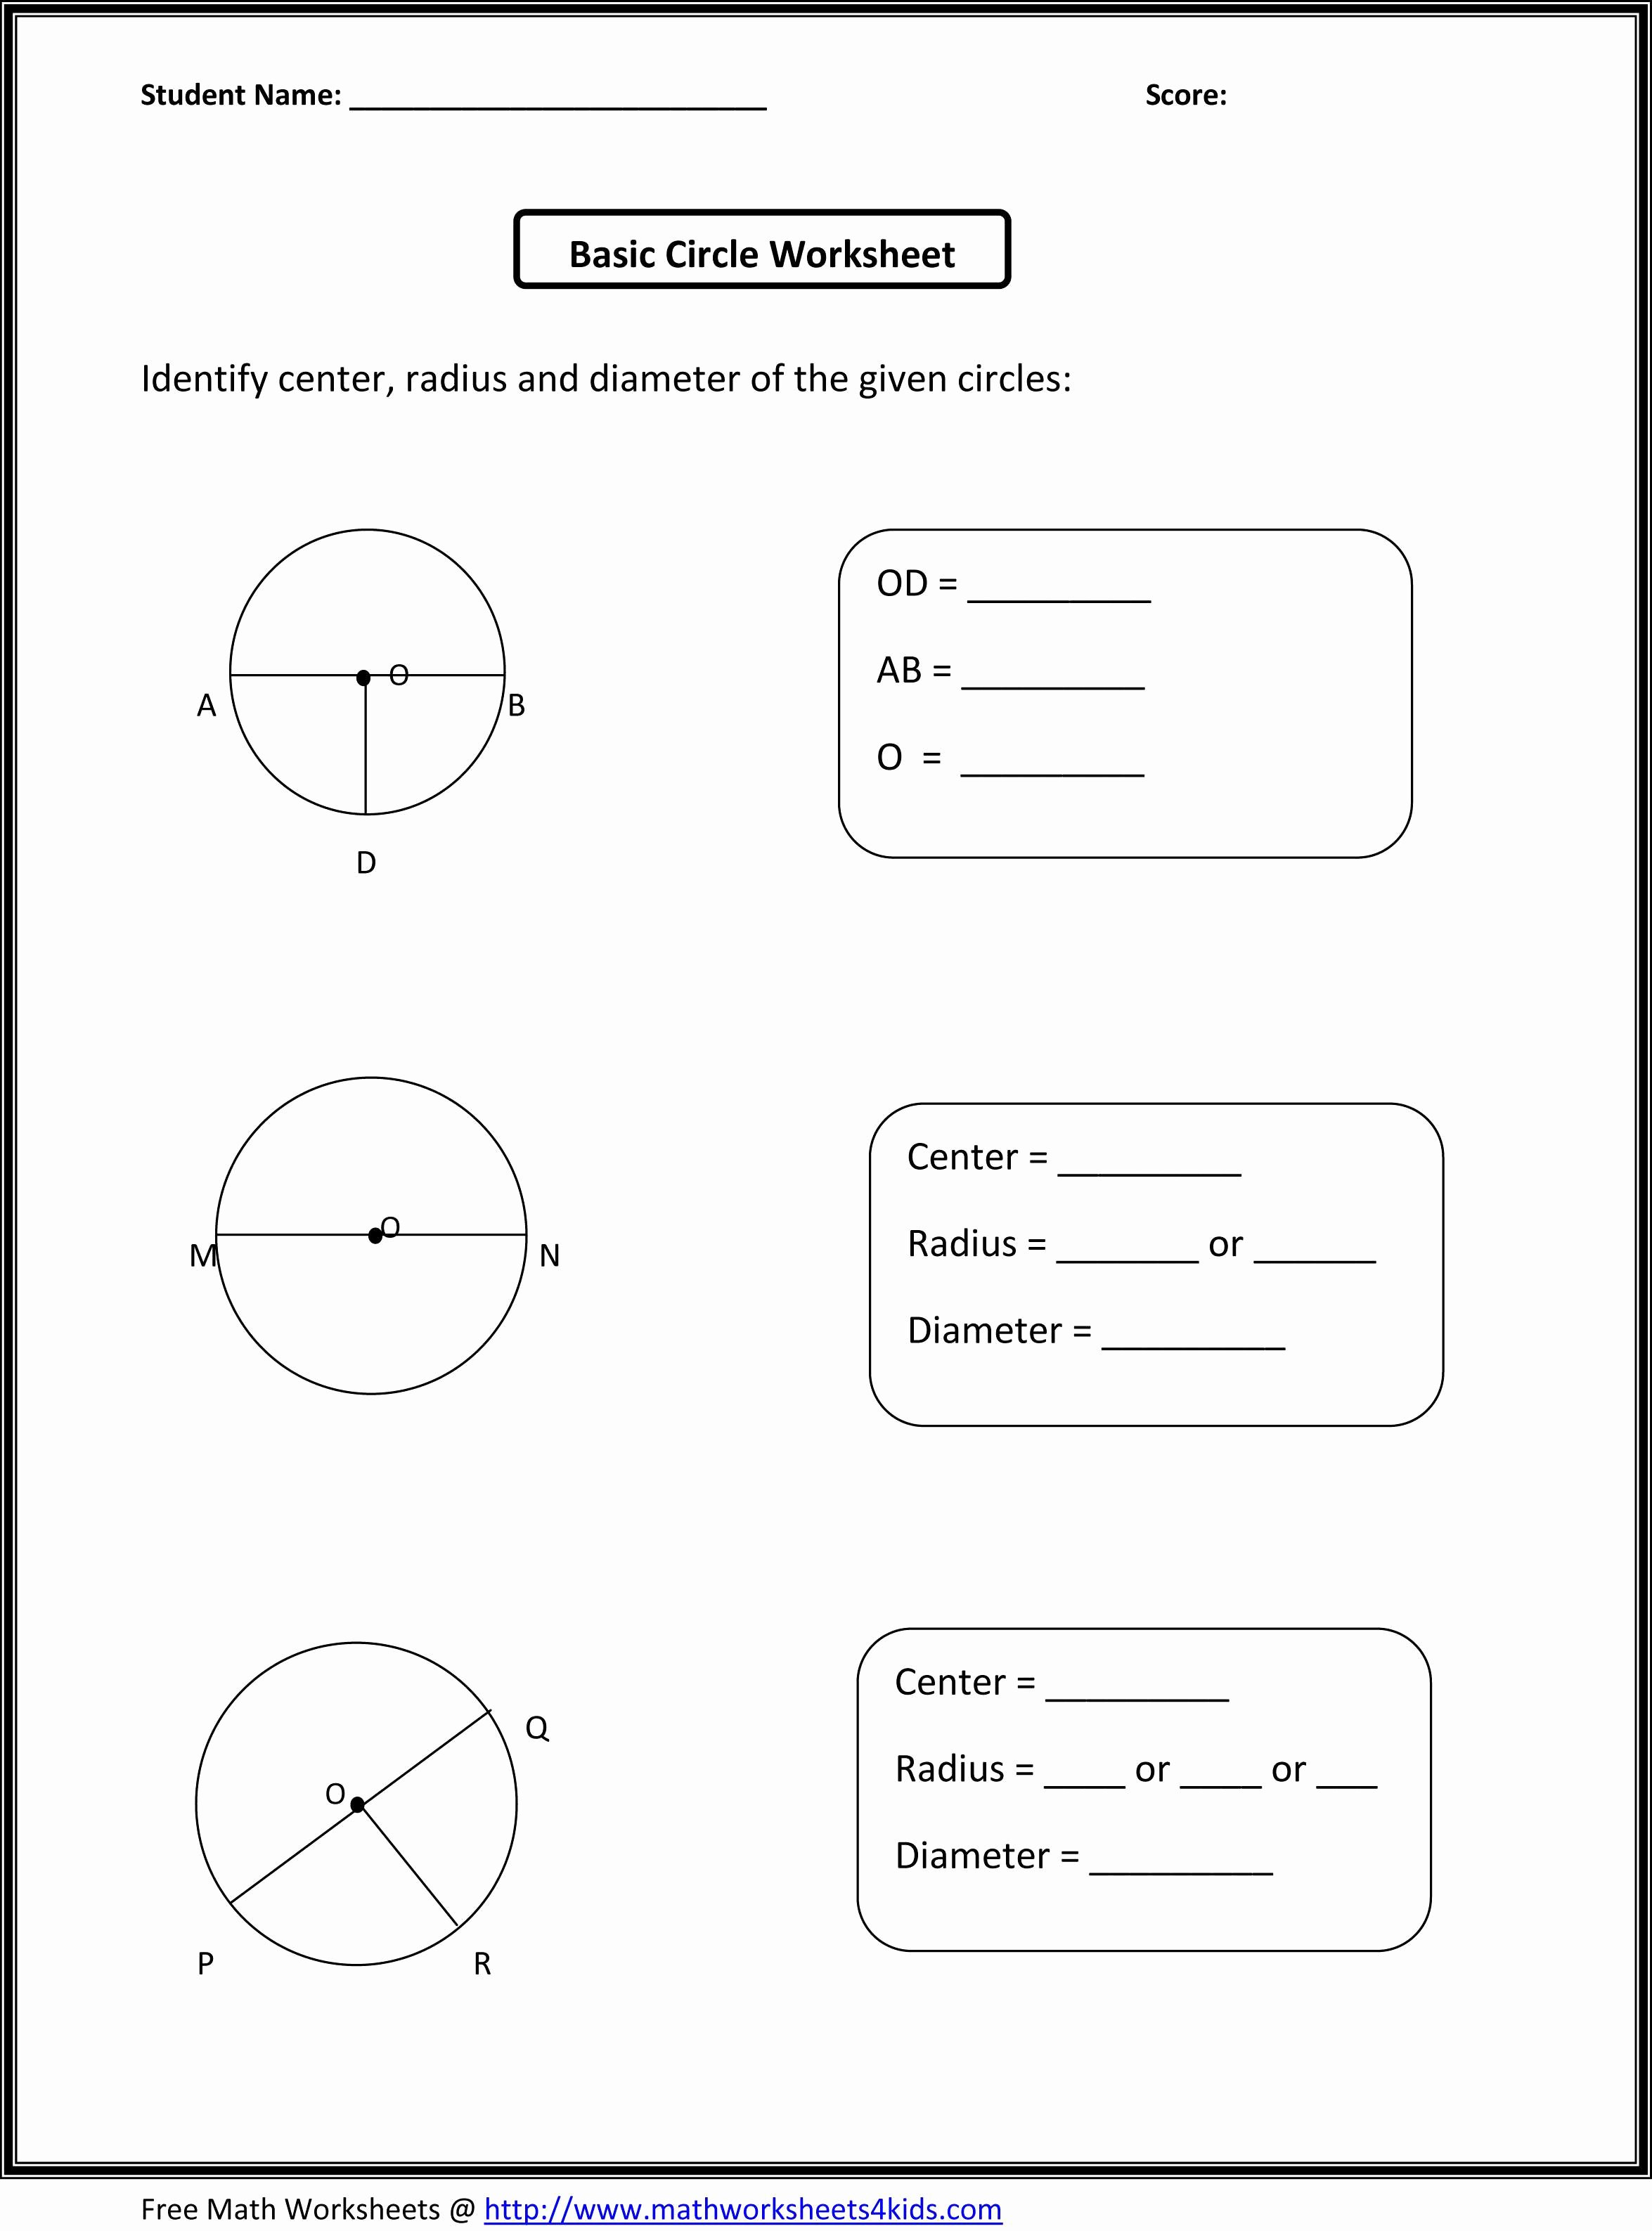 Geometry Transformation Composition Worksheet Answers Awesome Geometry Transformation Position Worksheet Answer Key